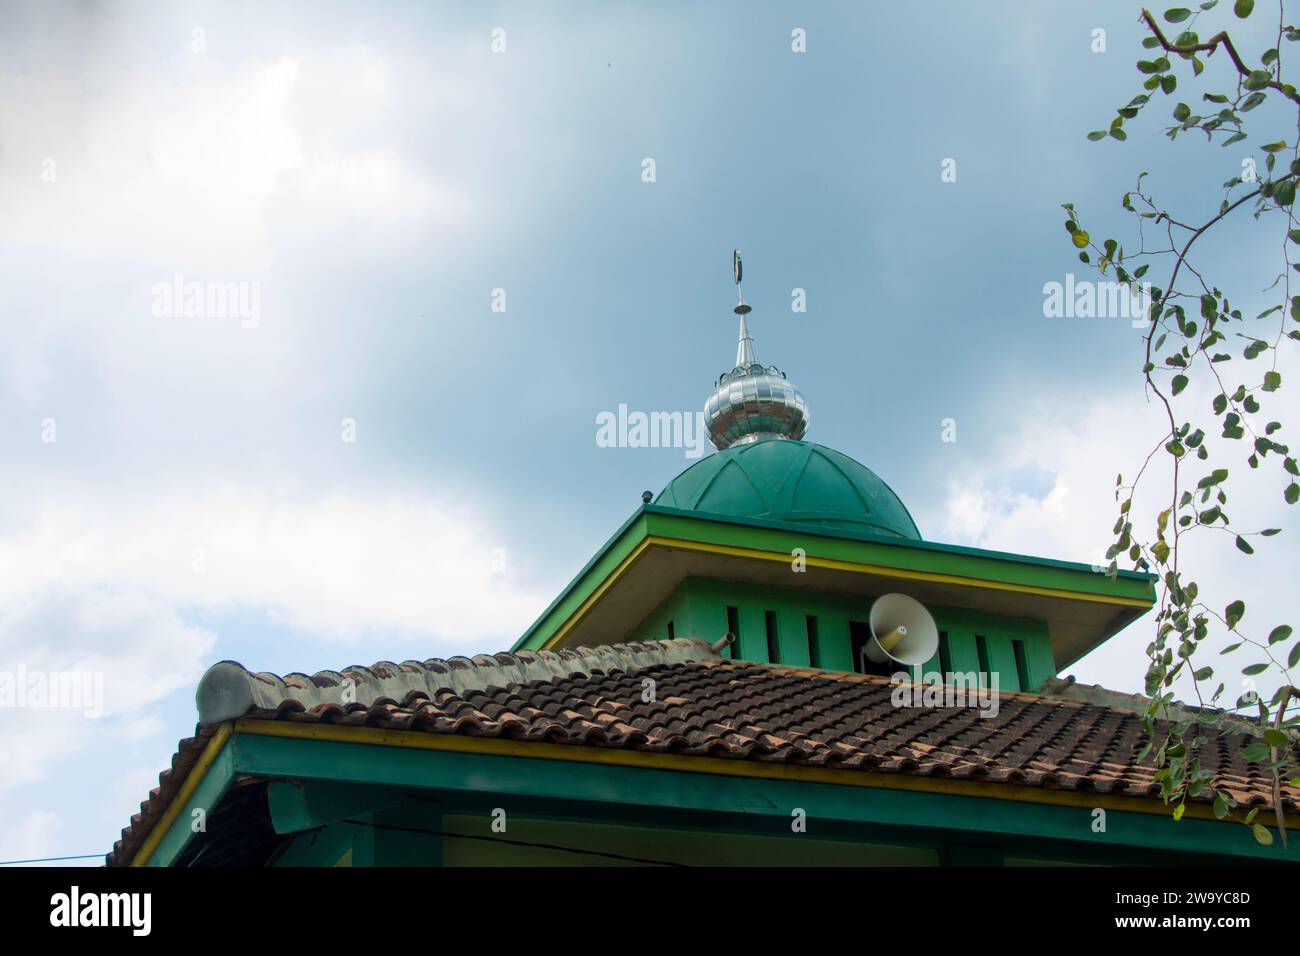 Traditional Indonesian mosque with setenlis dome and toa speakers against a cloudy sky background Stock Photo